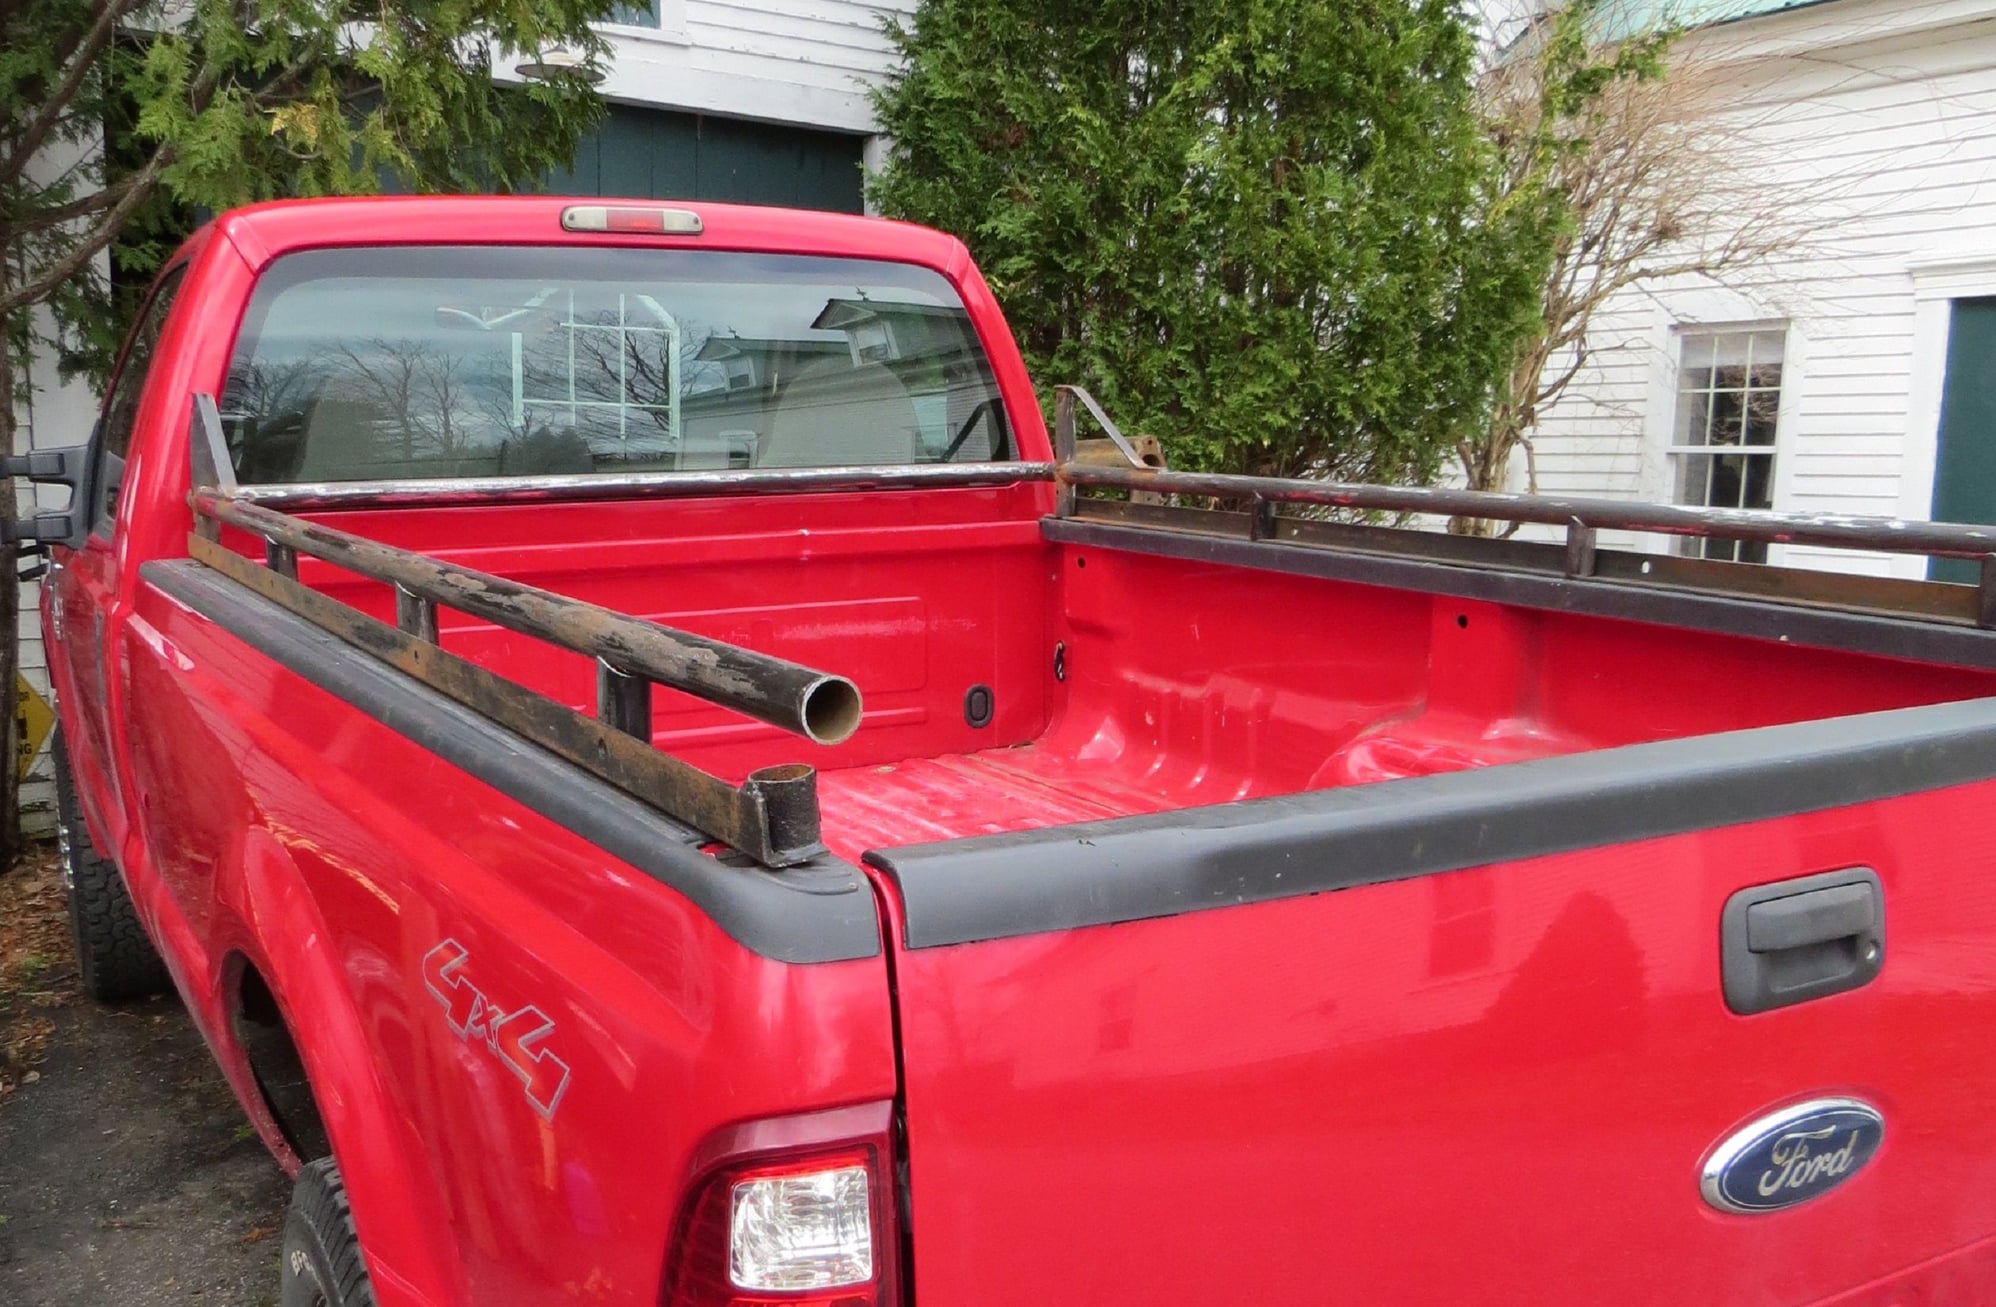 My bed rails with headache rack - Ford Truck Enthusiasts Forums